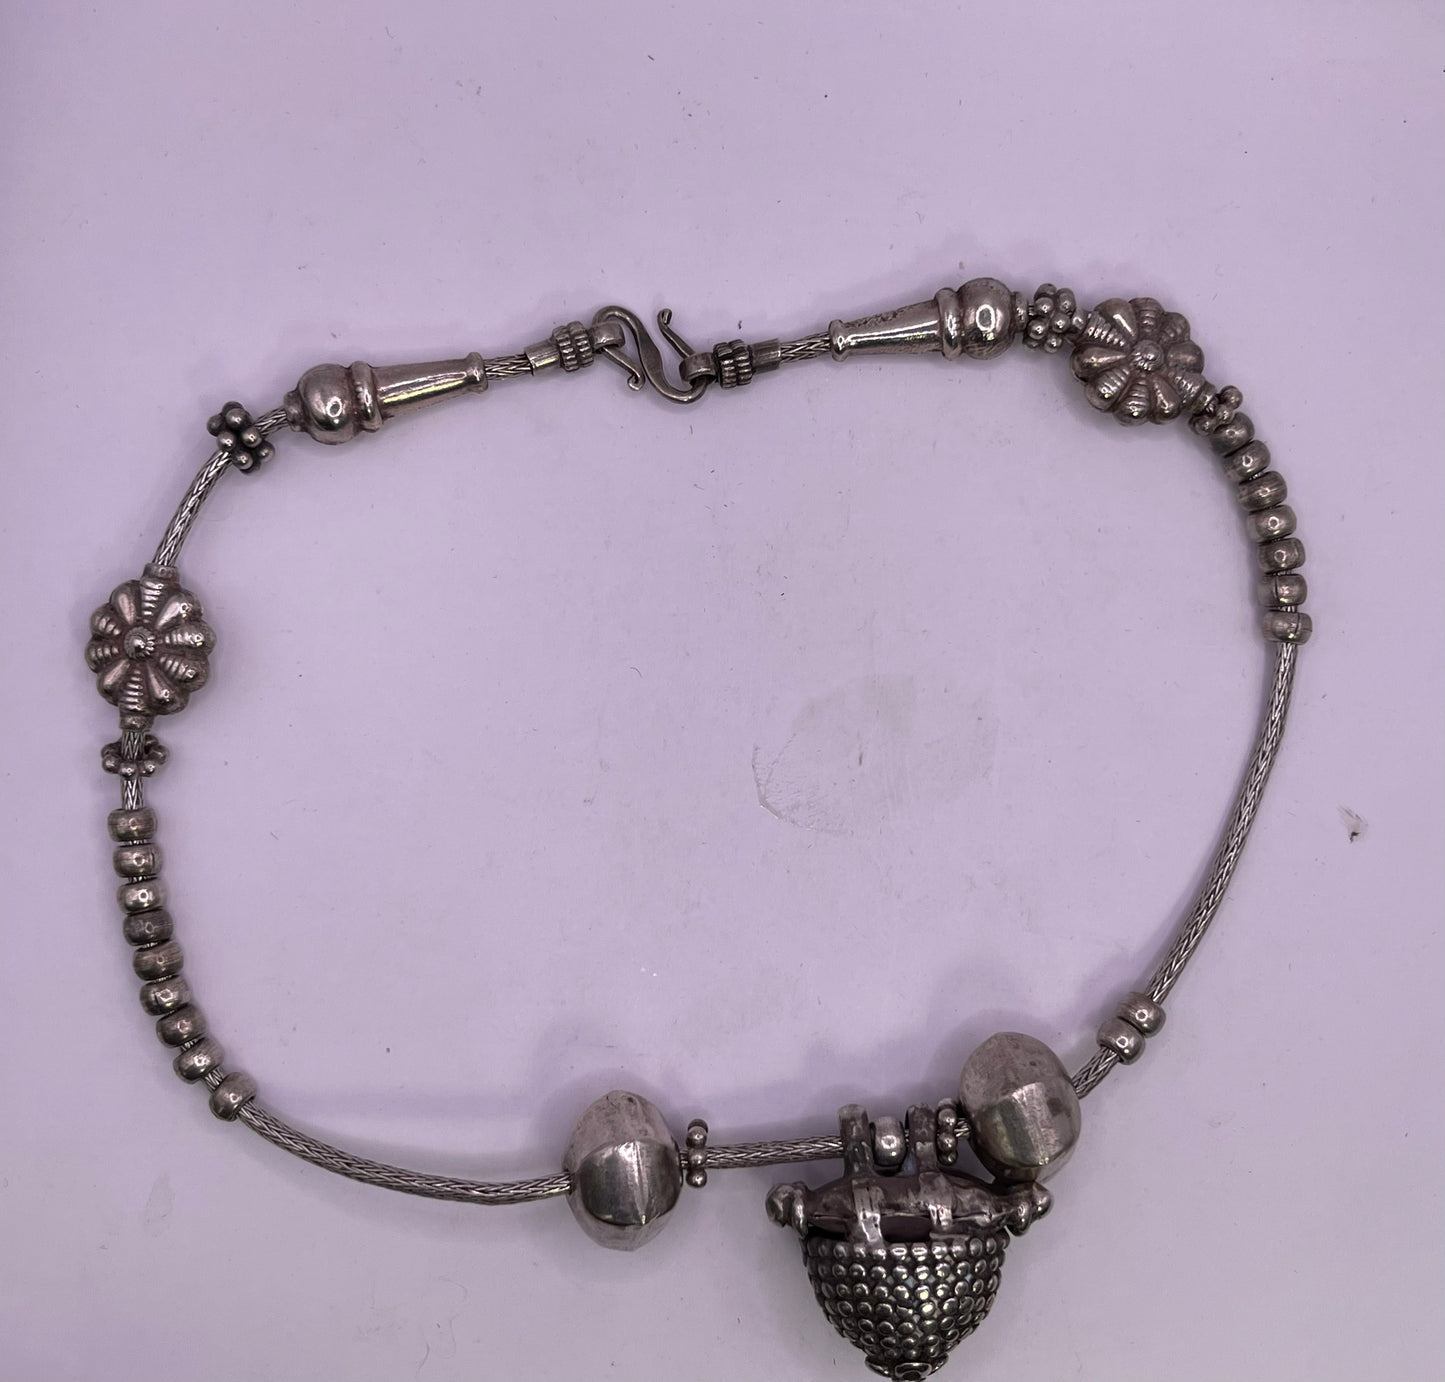 Vintage silver necklace with silver beads from India